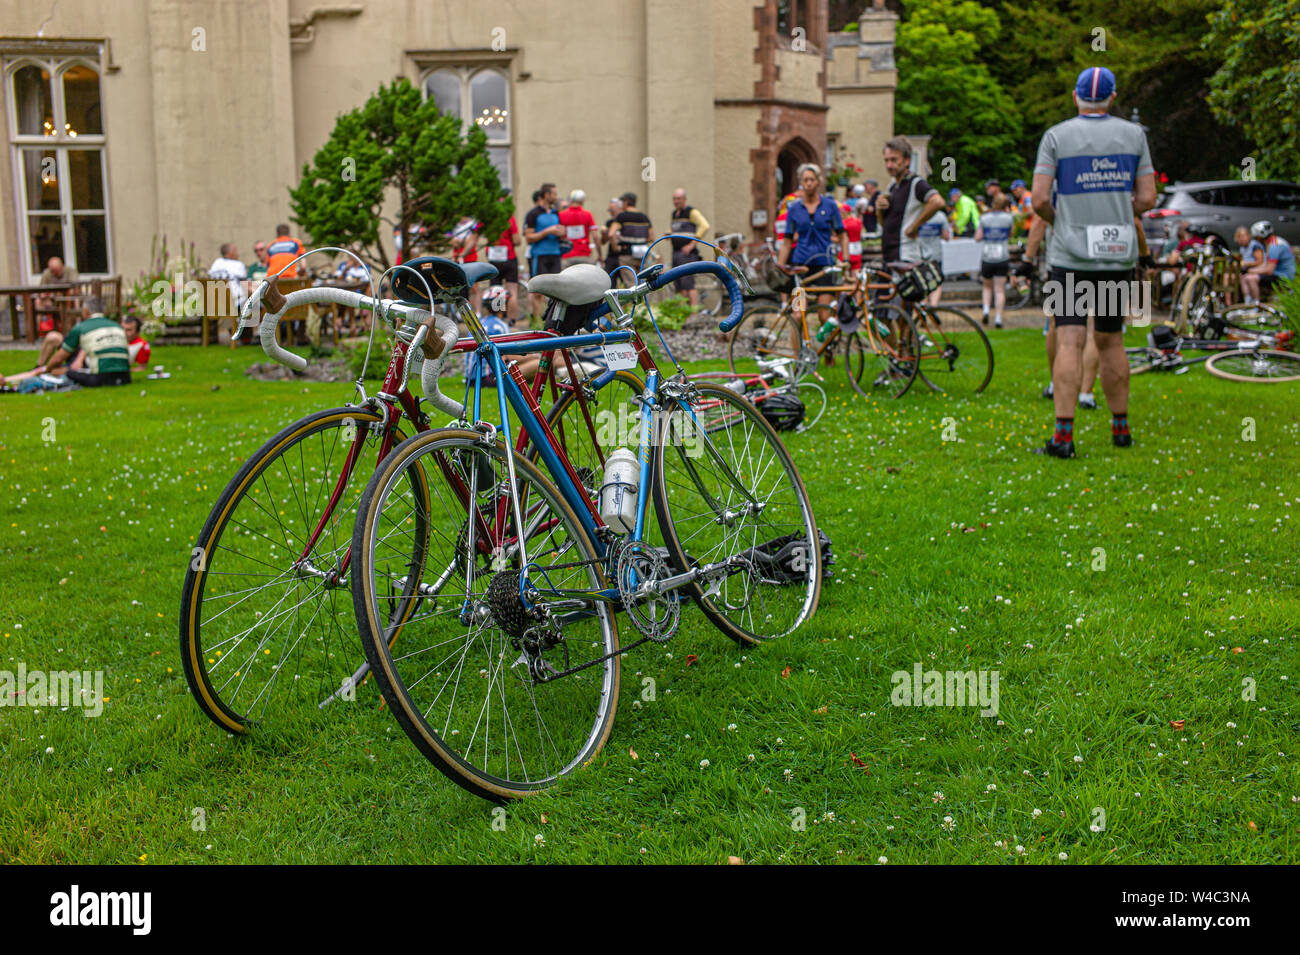 Lunch stop at the Veloretro vintage cycling event in Ulverston, Cumbria. Stock Photo